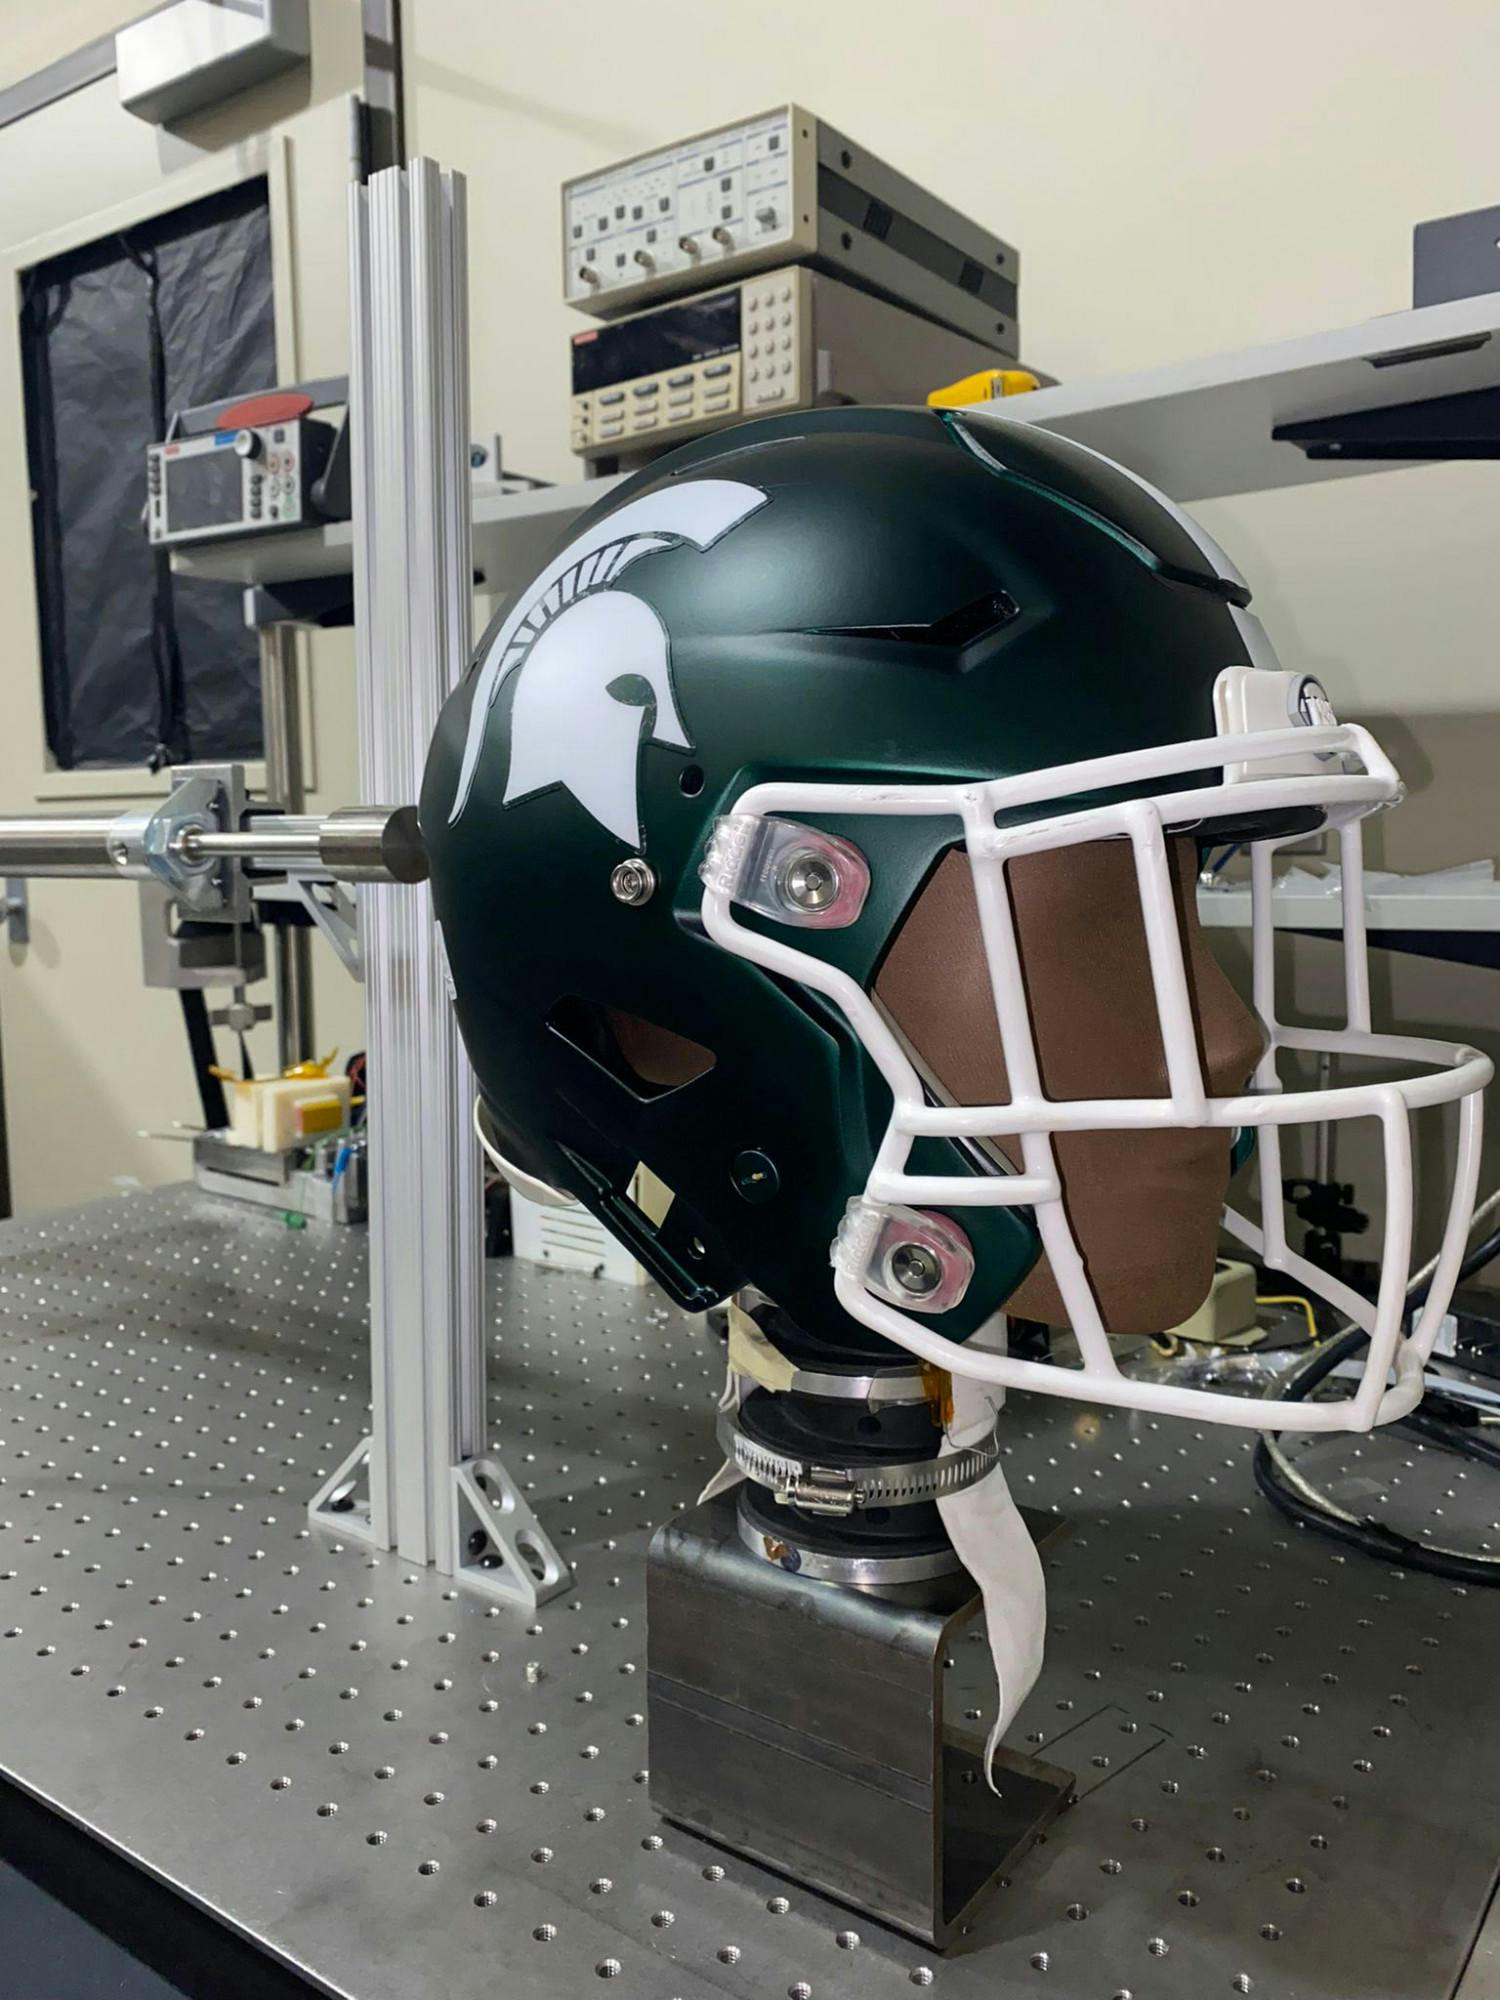 <p>Model used by MSU researchers in developing new neck banadages to help detect concussions. Photo courtesy of Gerardo Morales-Torres.</p>